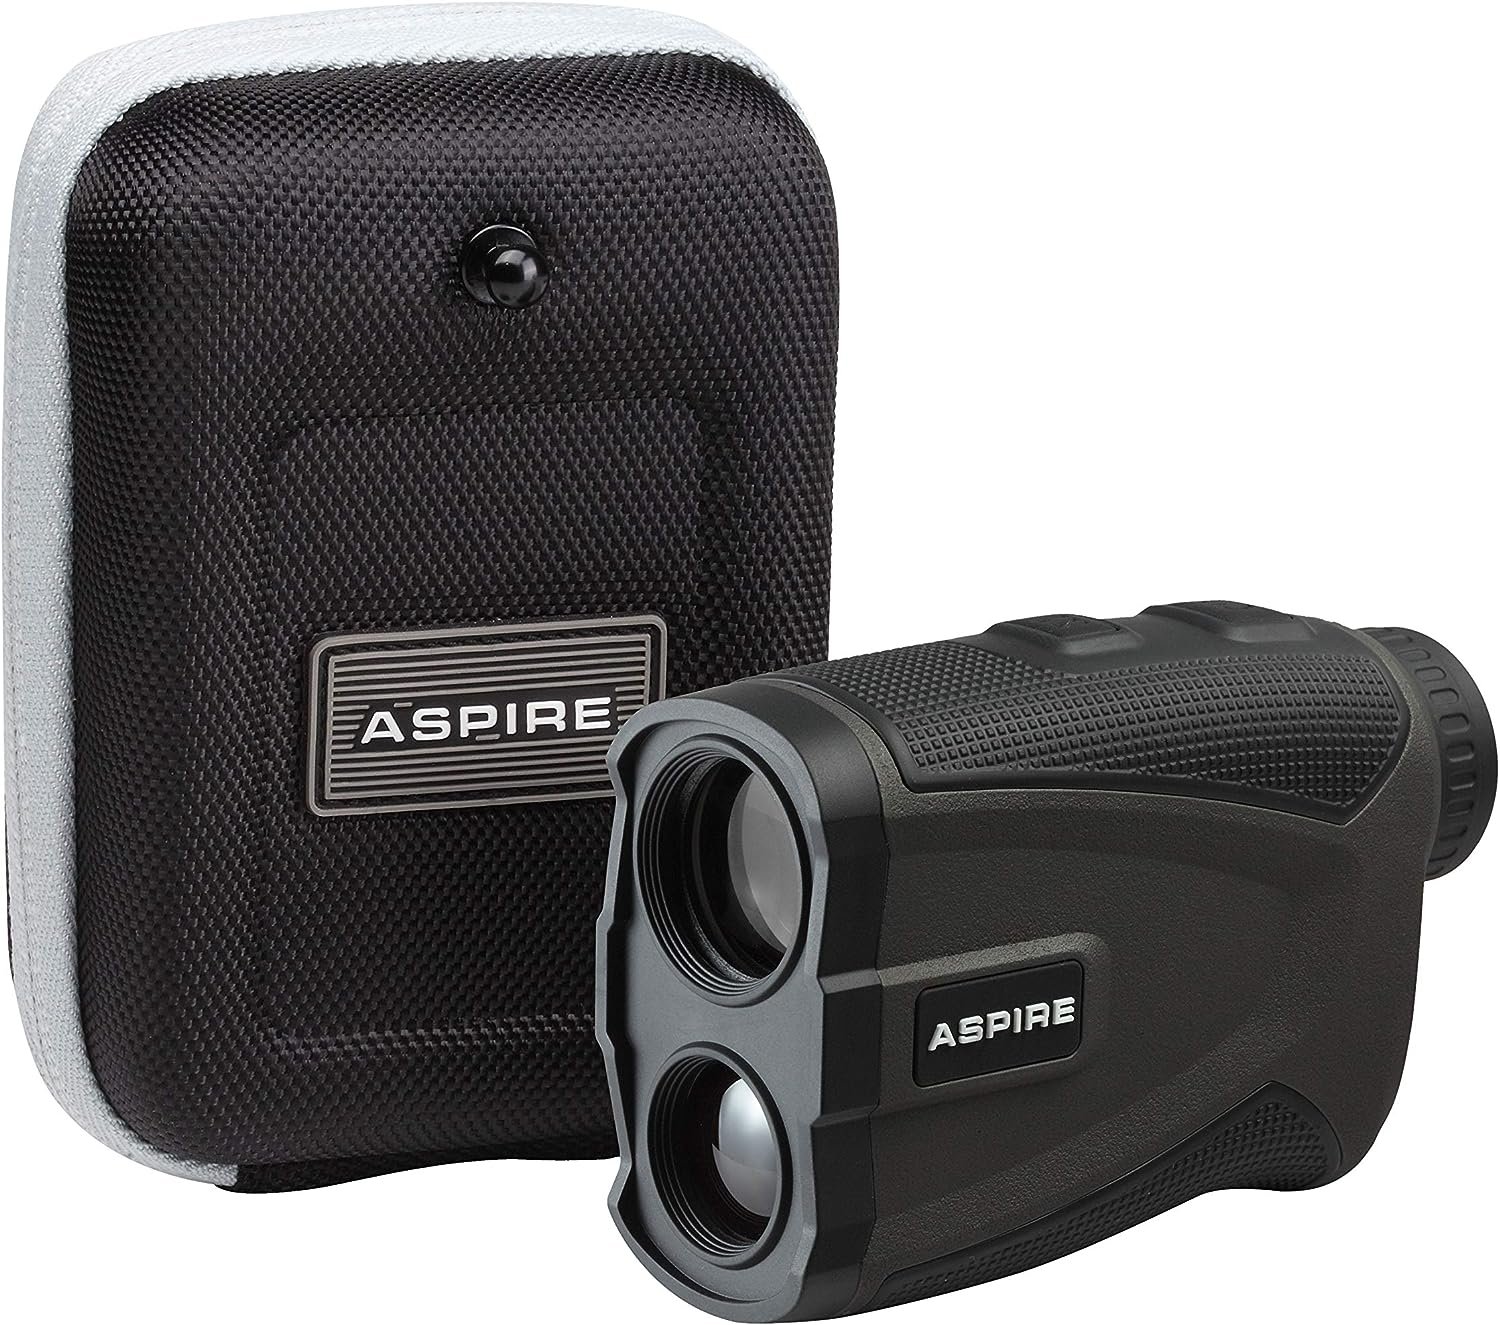 Aspire Golf Platinum Laser Rangefinder with Slope, 6X Magnification, 1000 Yards, Pin Seek, Target Lock, Vibration Alert, Noise Filtration, IPX5 Water Resistance — Case and Battery Included